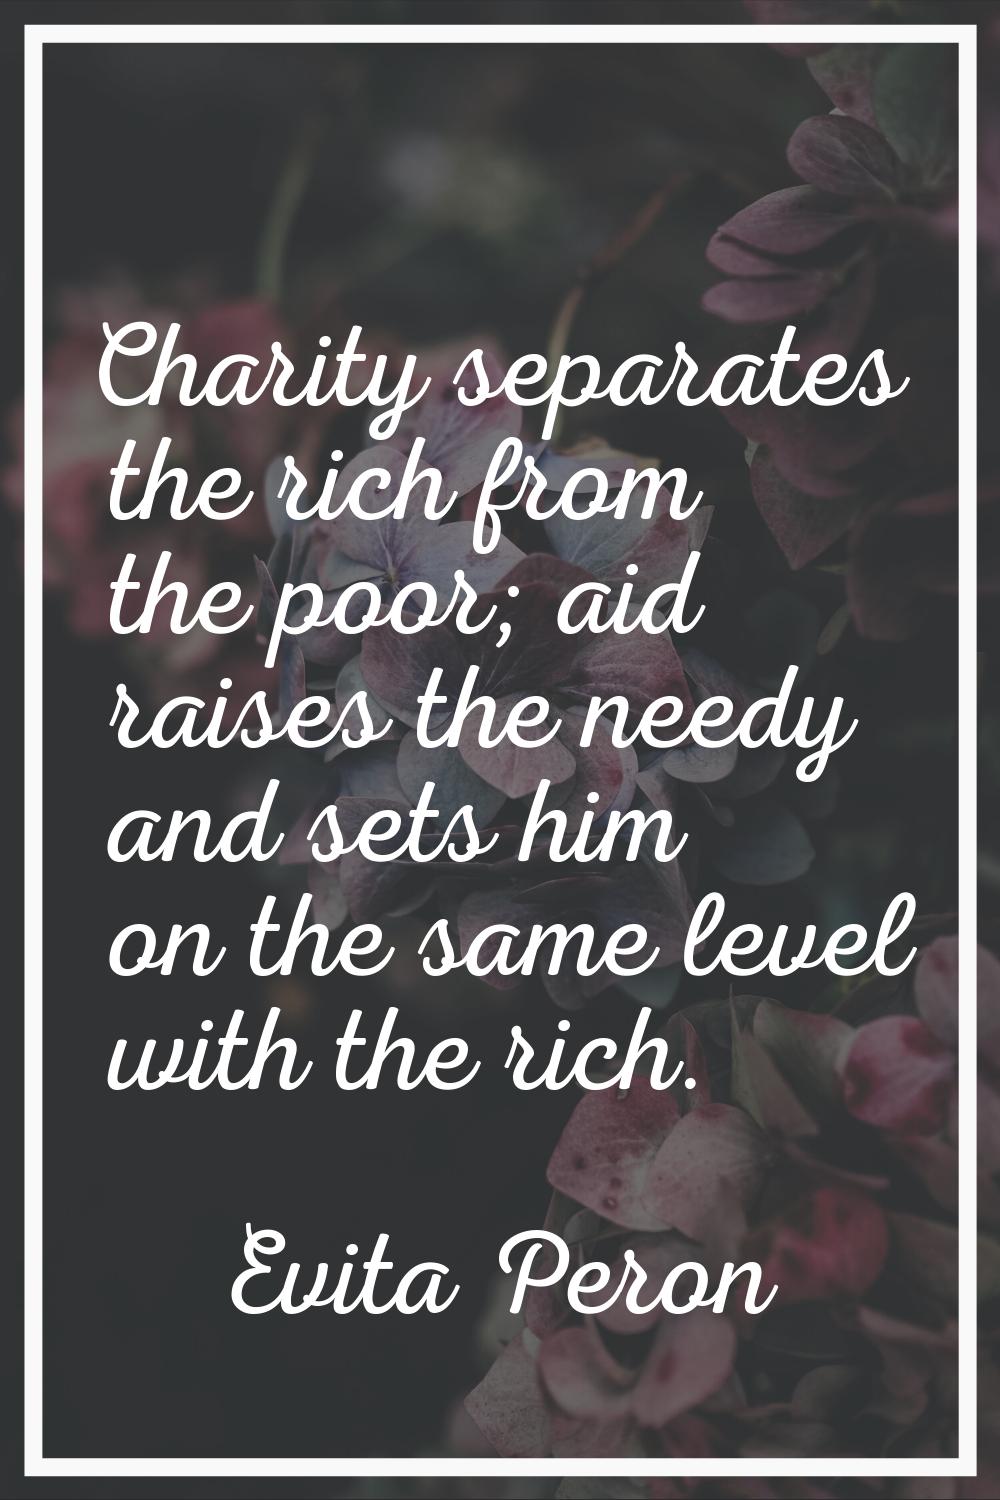 Charity separates the rich from the poor; aid raises the needy and sets him on the same level with 